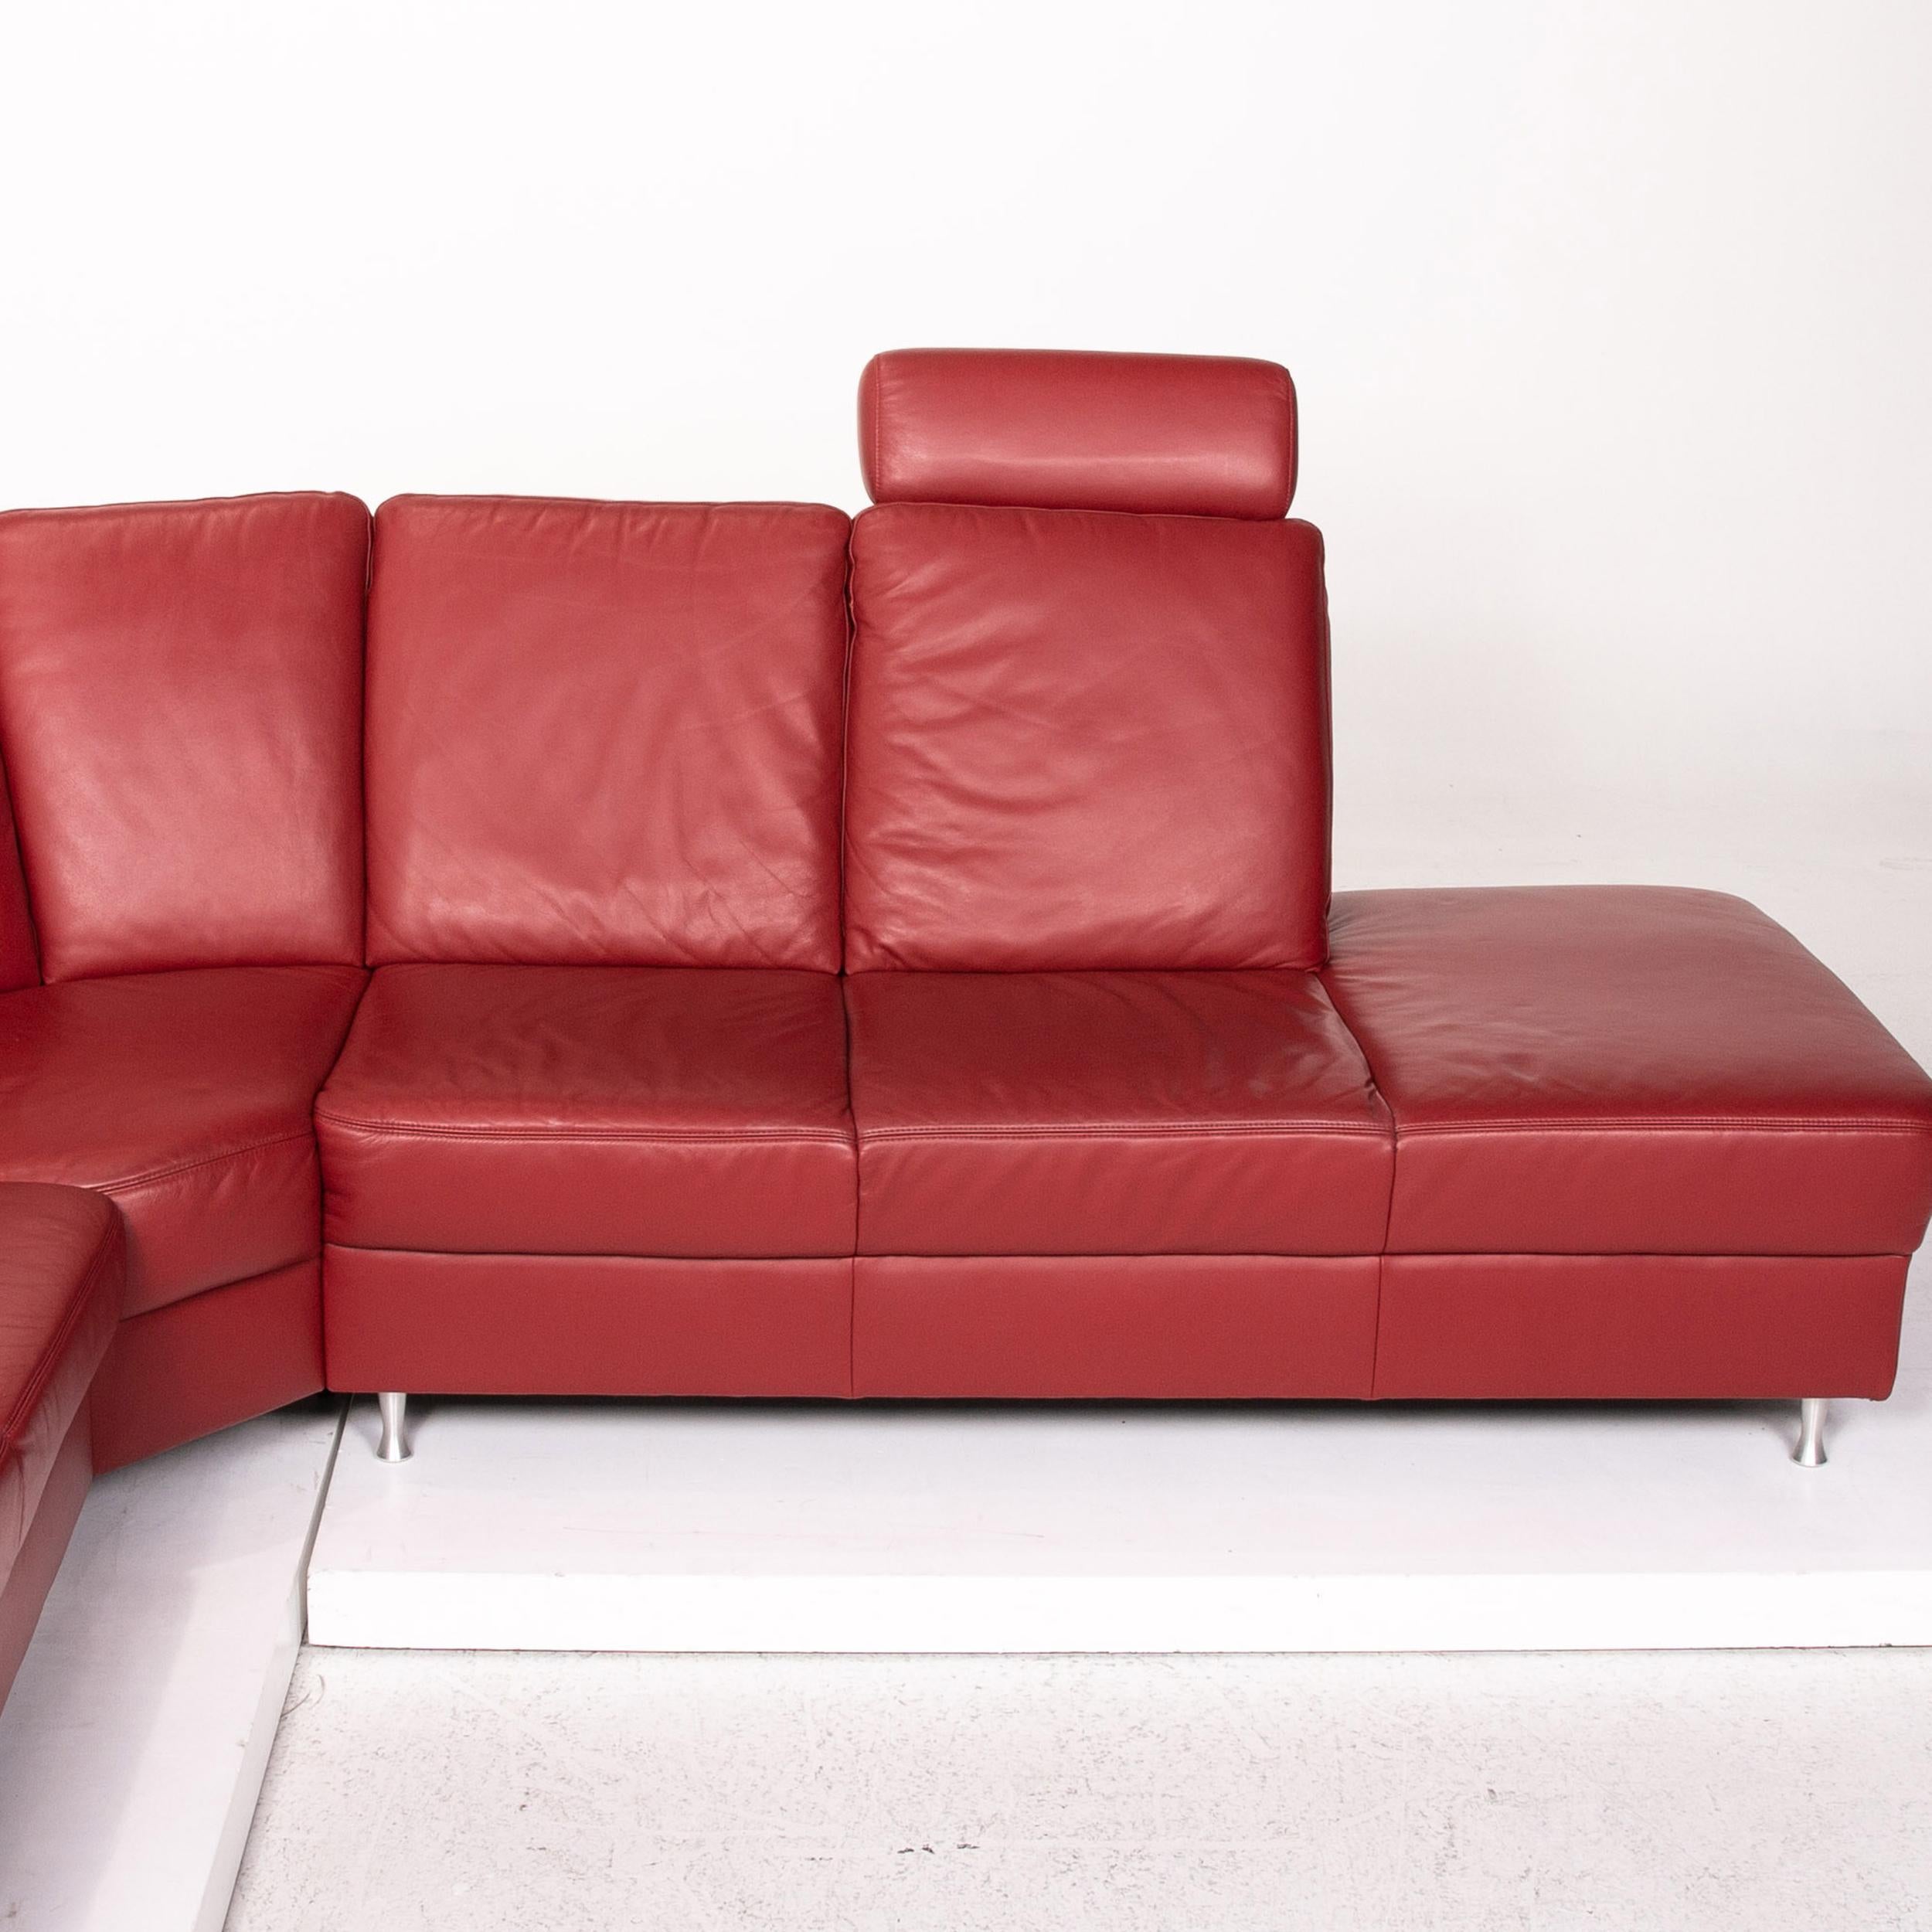 Sample Ring Leather Corner Sofa Red Dark Red Sofa Function Couch For Sale 2